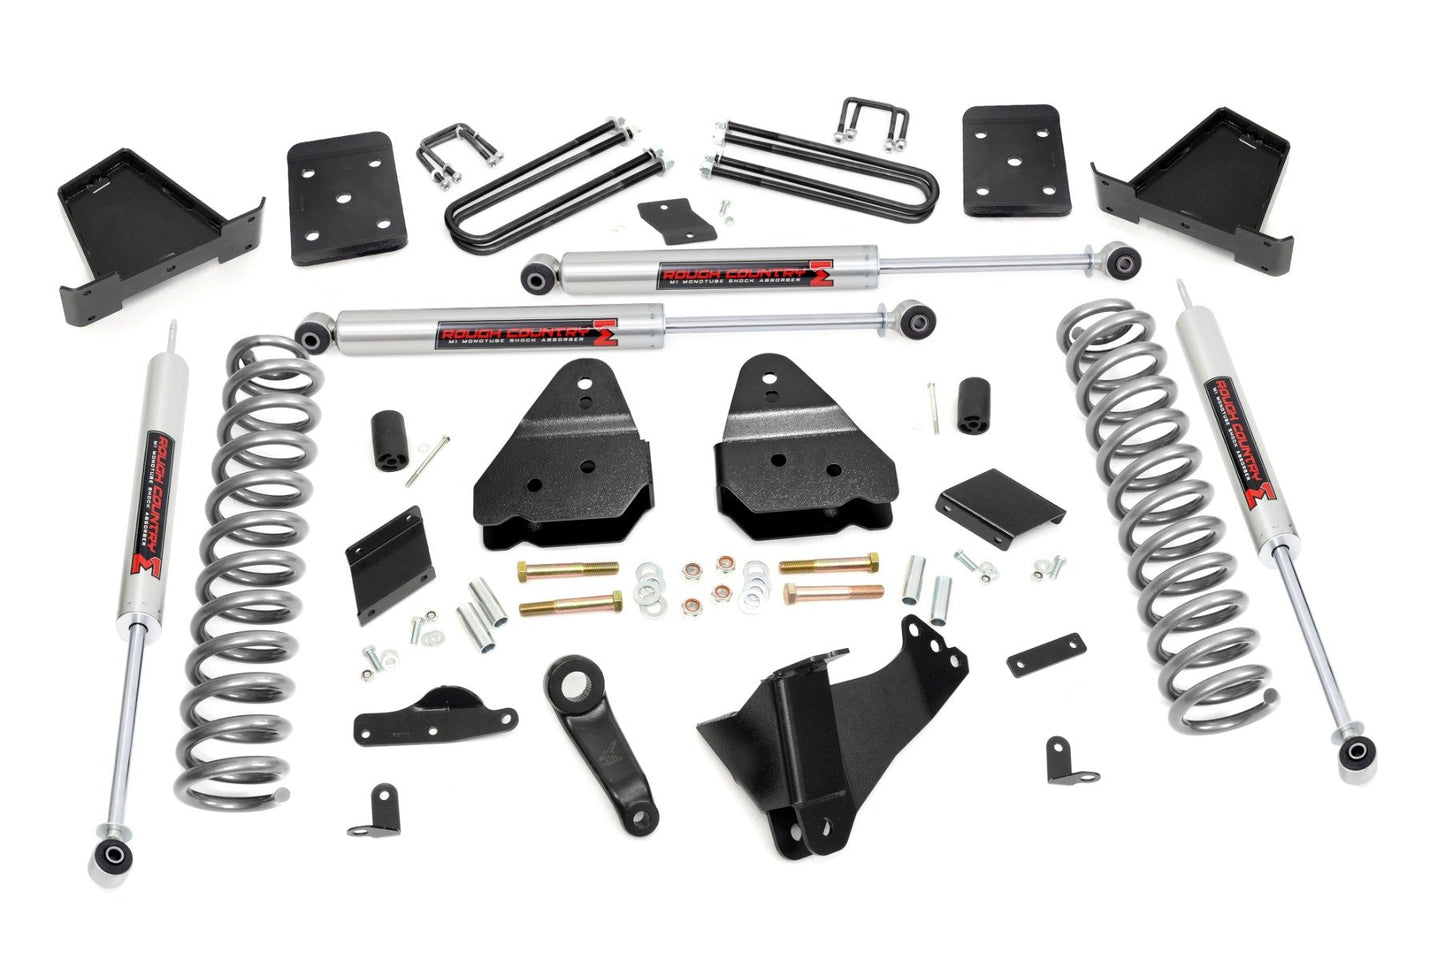 Rough Country (52940) 6 Inch Lift Kit | Gas | No OVLD | M1 | Ford F-250 Super Duty 4WD (2015-2016)